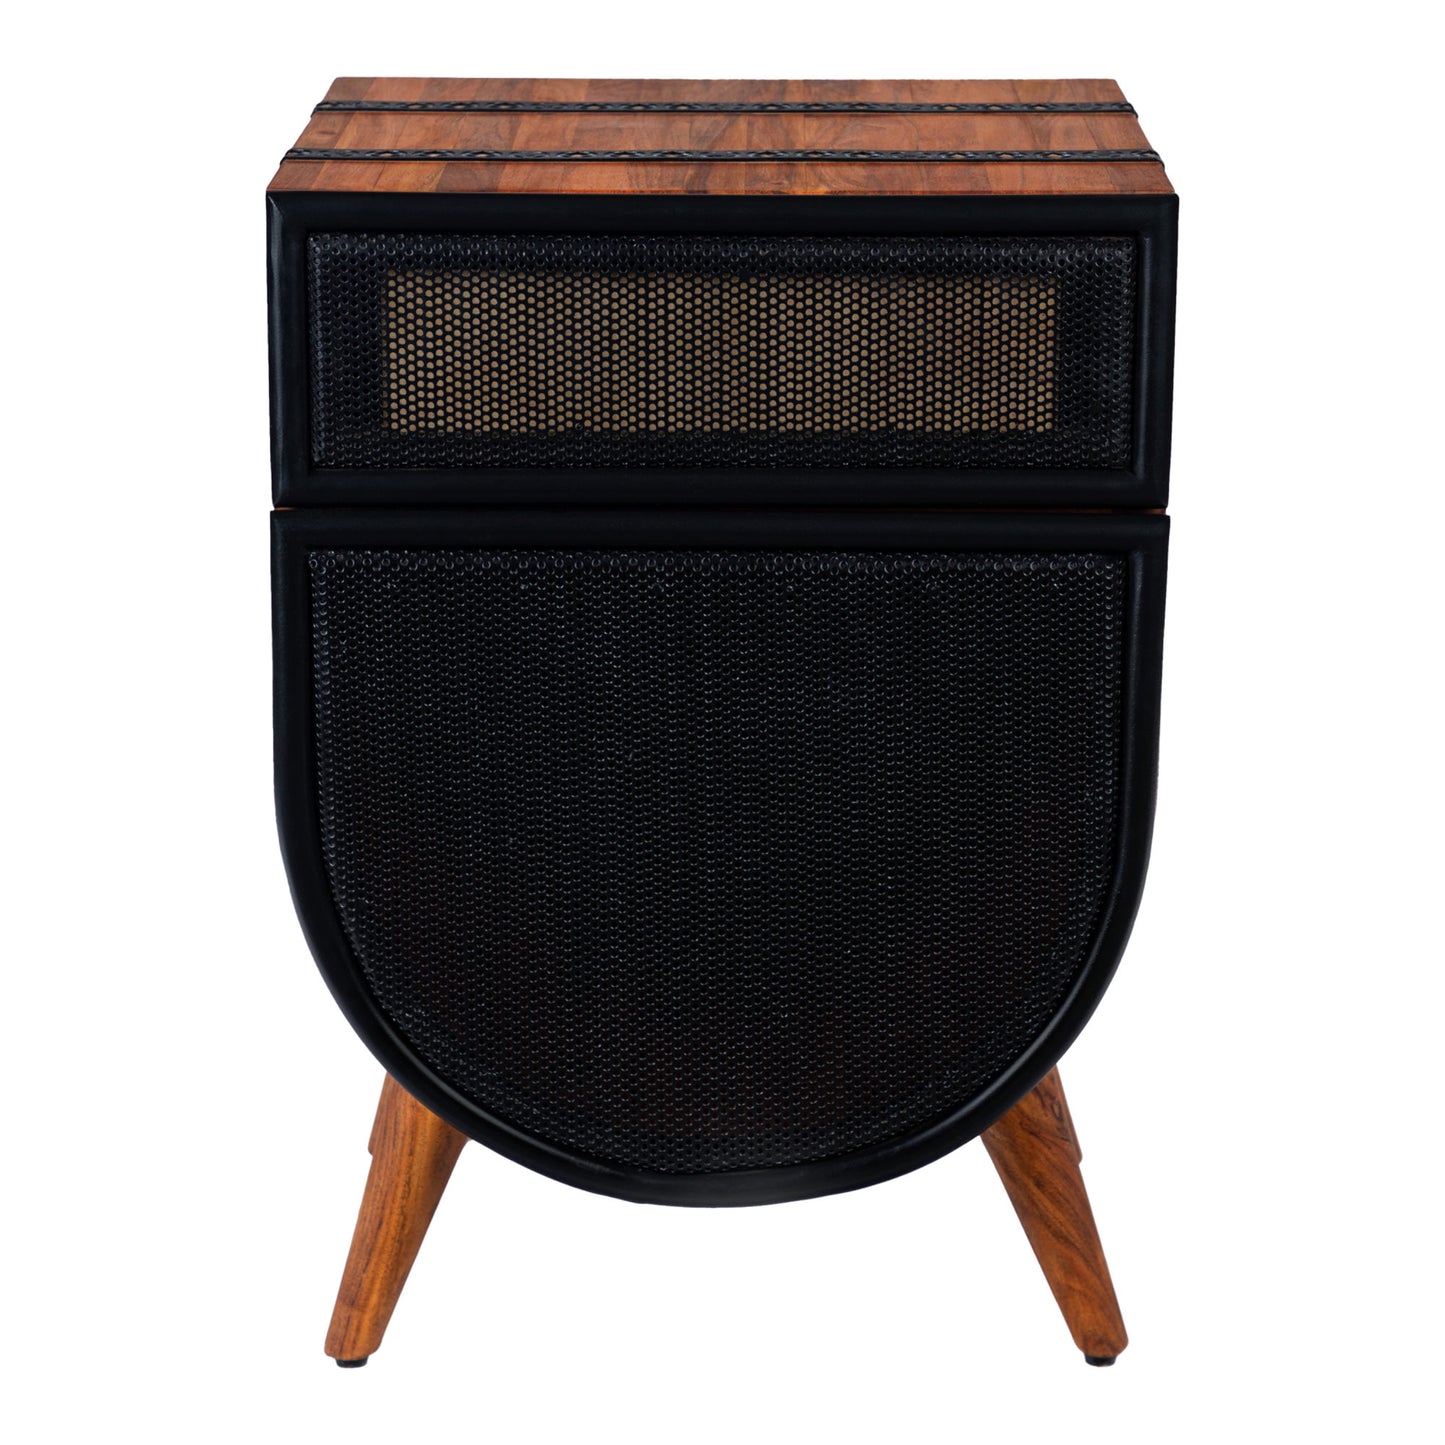 24 Inch Acacia Wood Accent Cabinet Chest with 1 Mesh Drawer and 1 Door, Brown and Black